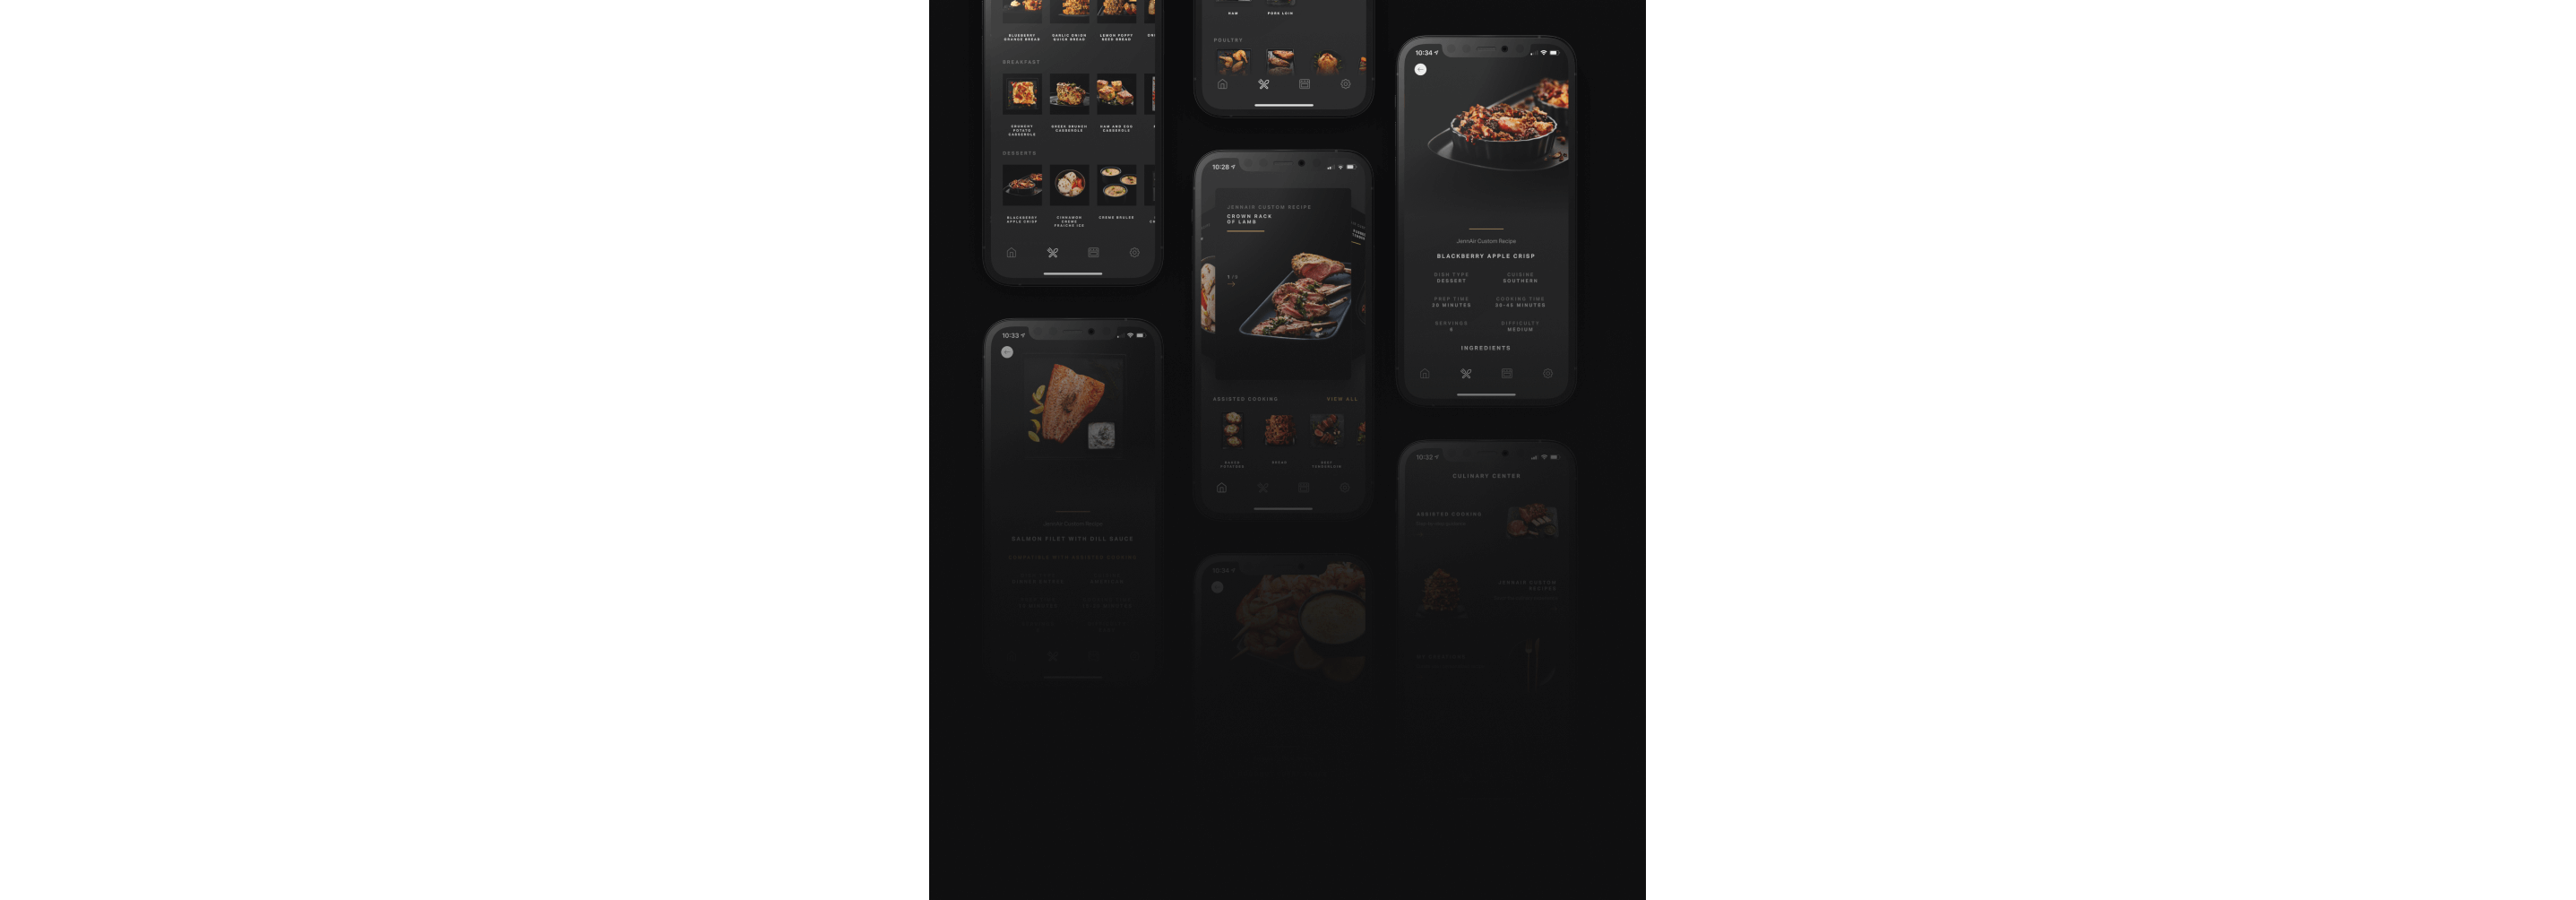 Screens from the Culinary Center on the JennAir app.